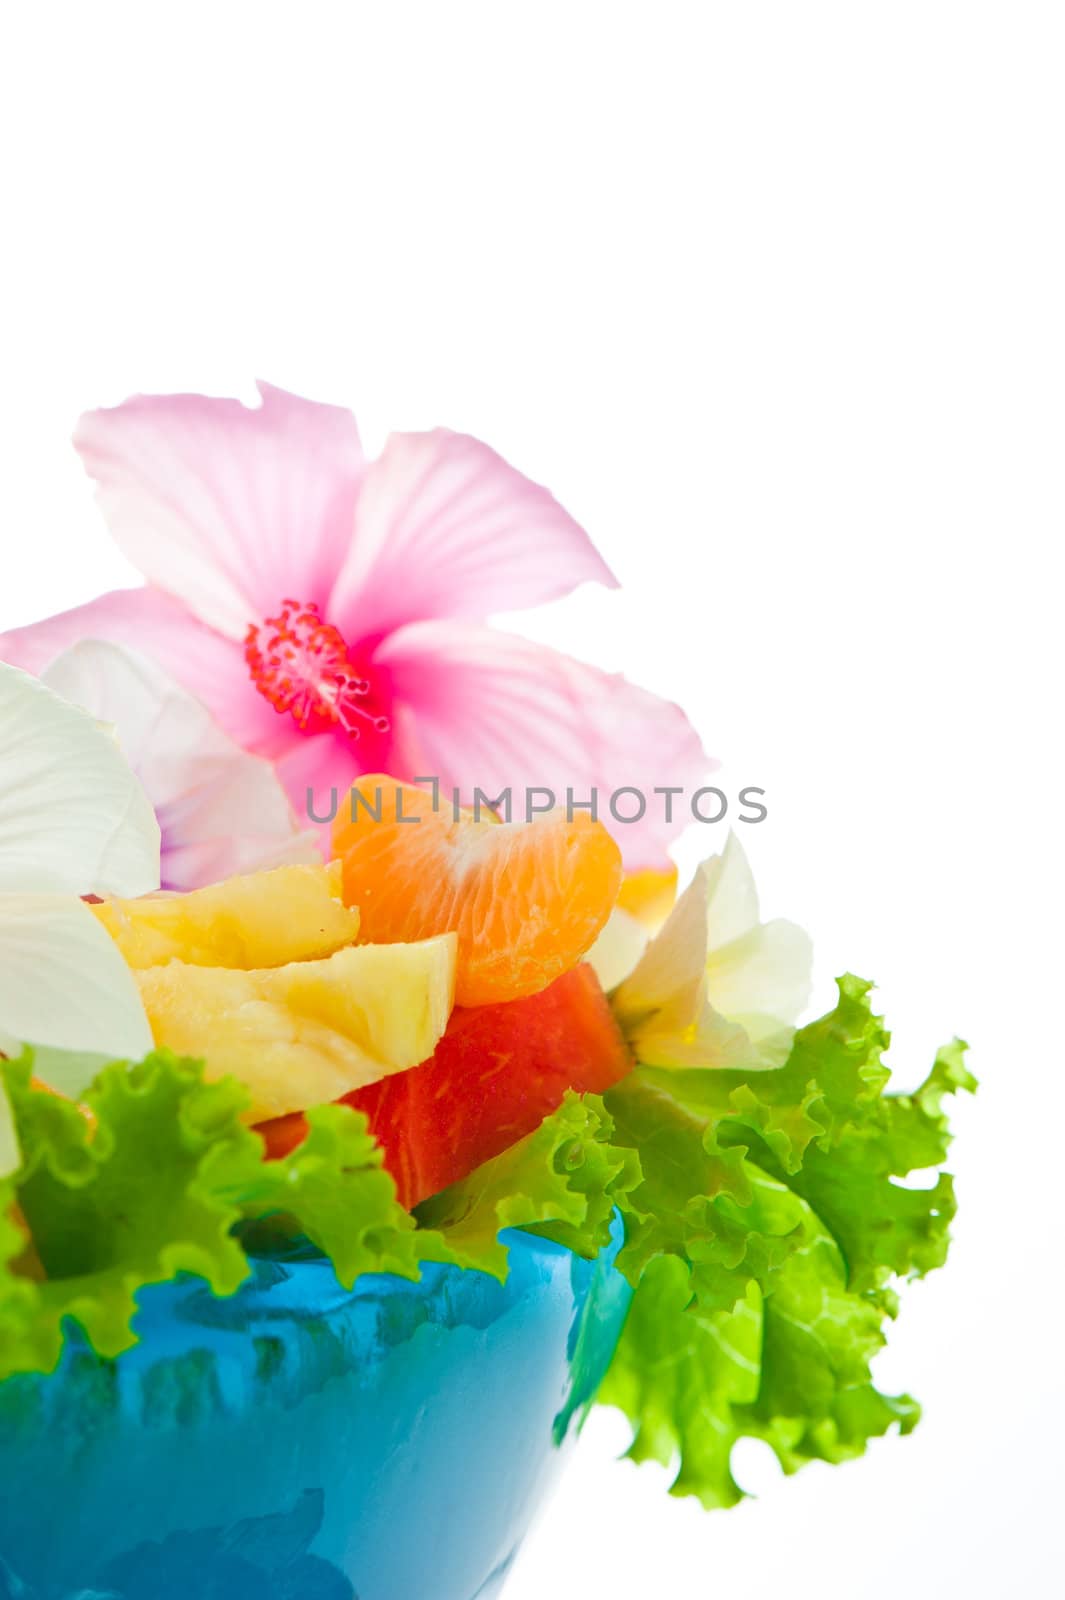 Fruit salad with edible flowers in a blue bowl from ice on white background